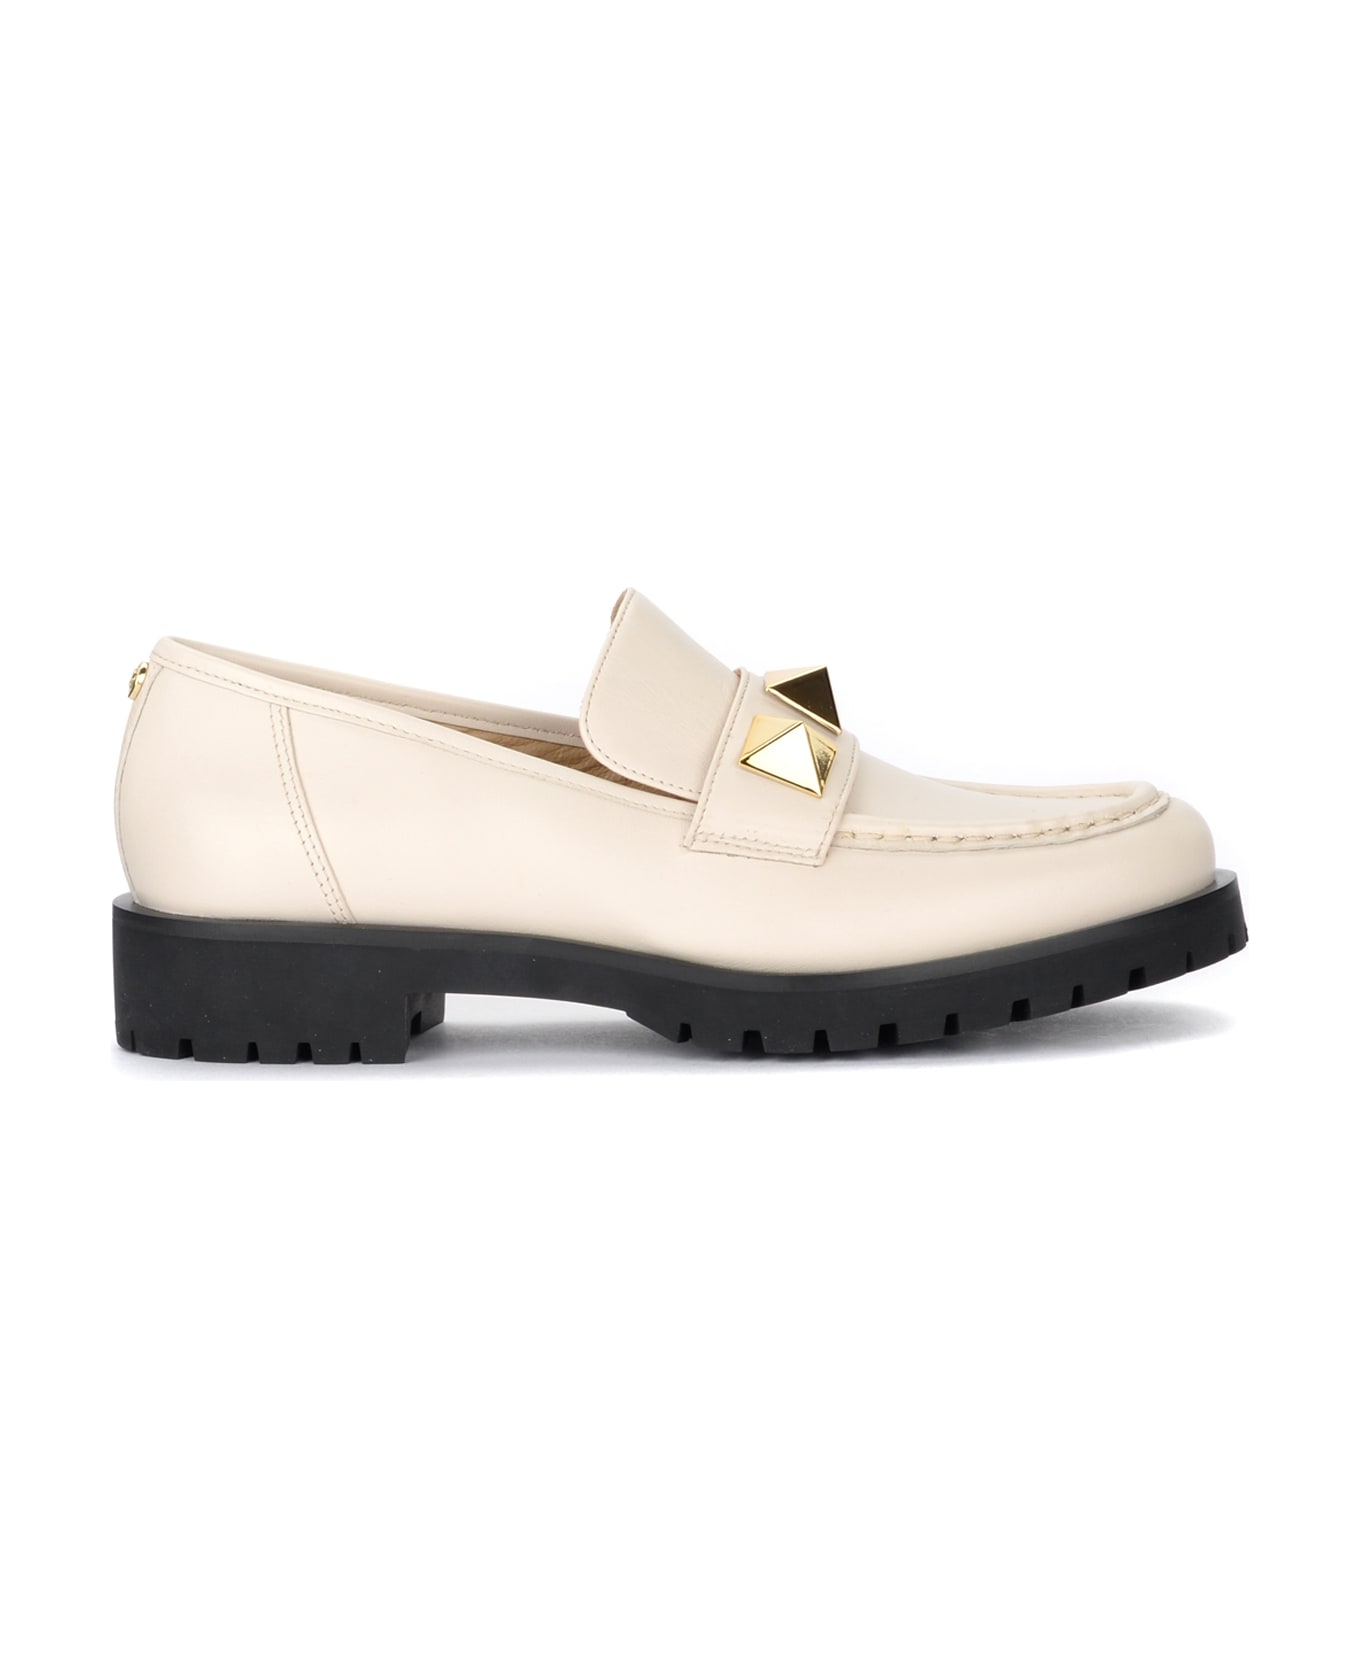 Michael Kors Holland Moccasin In Cream Color Leather | italist, ALWAYS ...